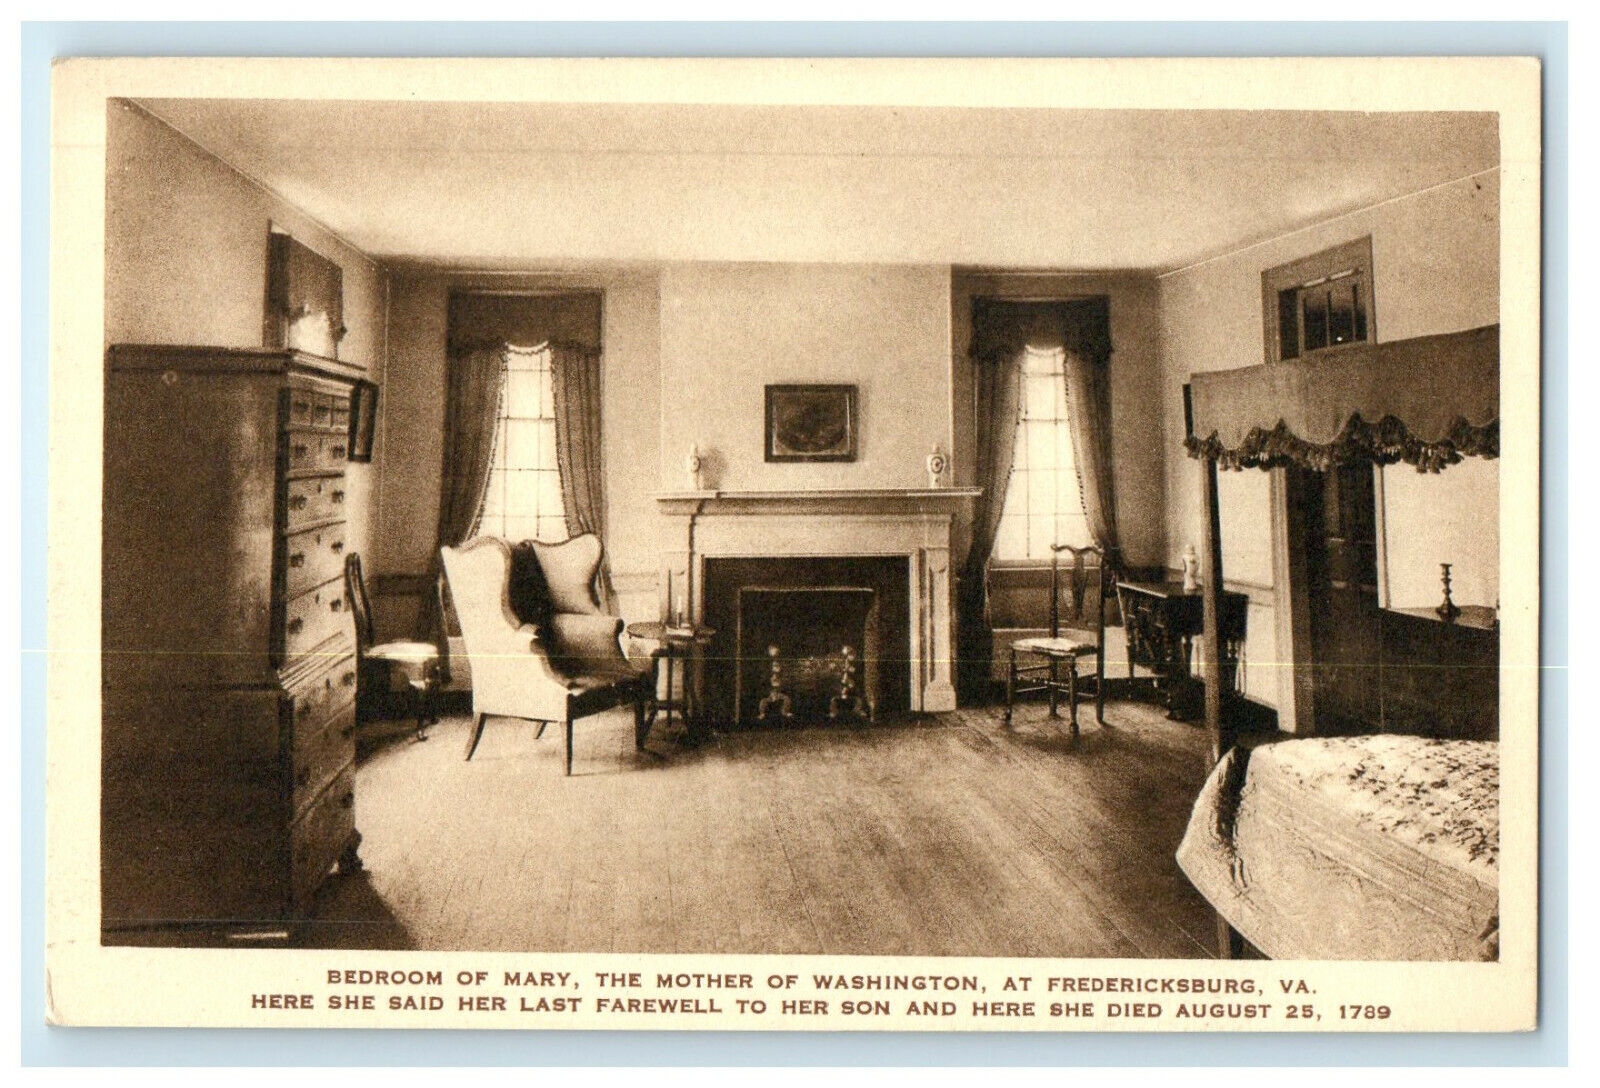 c1920s Fireplace, Seat & Bedroom of Mary The Mother of Washington Postcard